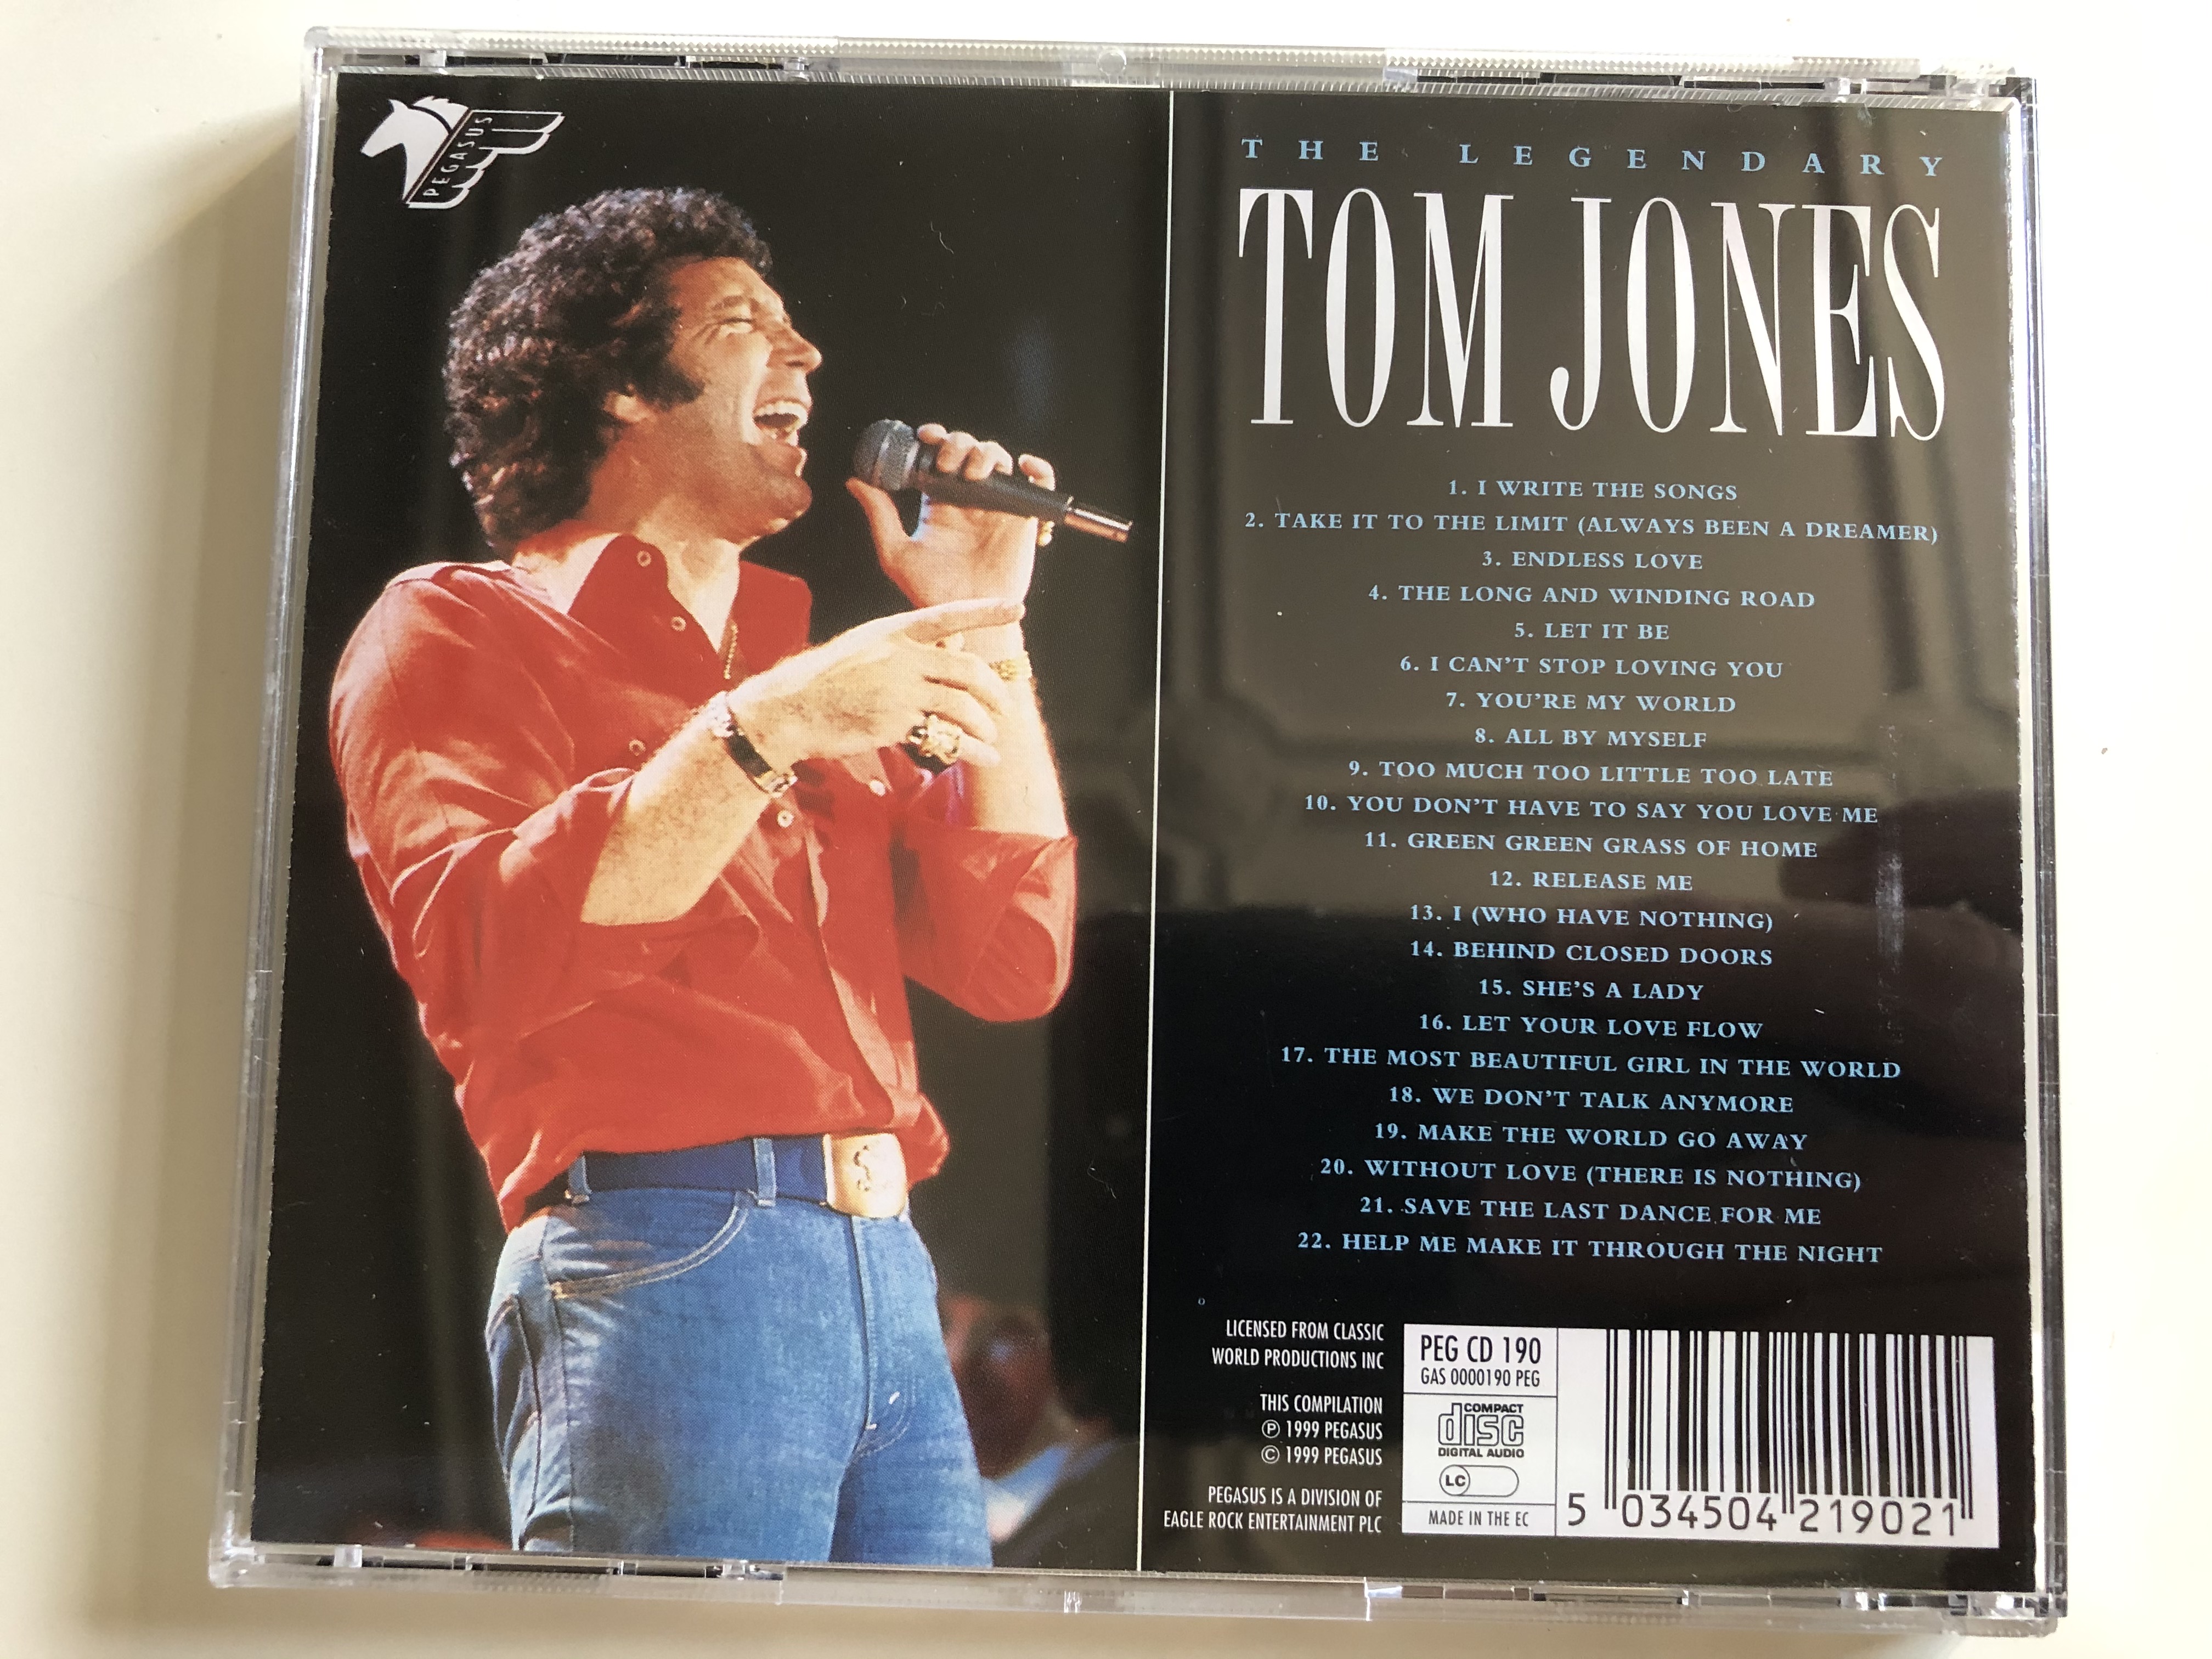 the-legendary-tom-jones-including-green-green-grass-of-home-save-the-last-dance-for-me-i-can-t-stop-loving-you-she-s-a-lady-release-me-pegasus-audio-cd-1999-peg-cd-190-5-.jpg